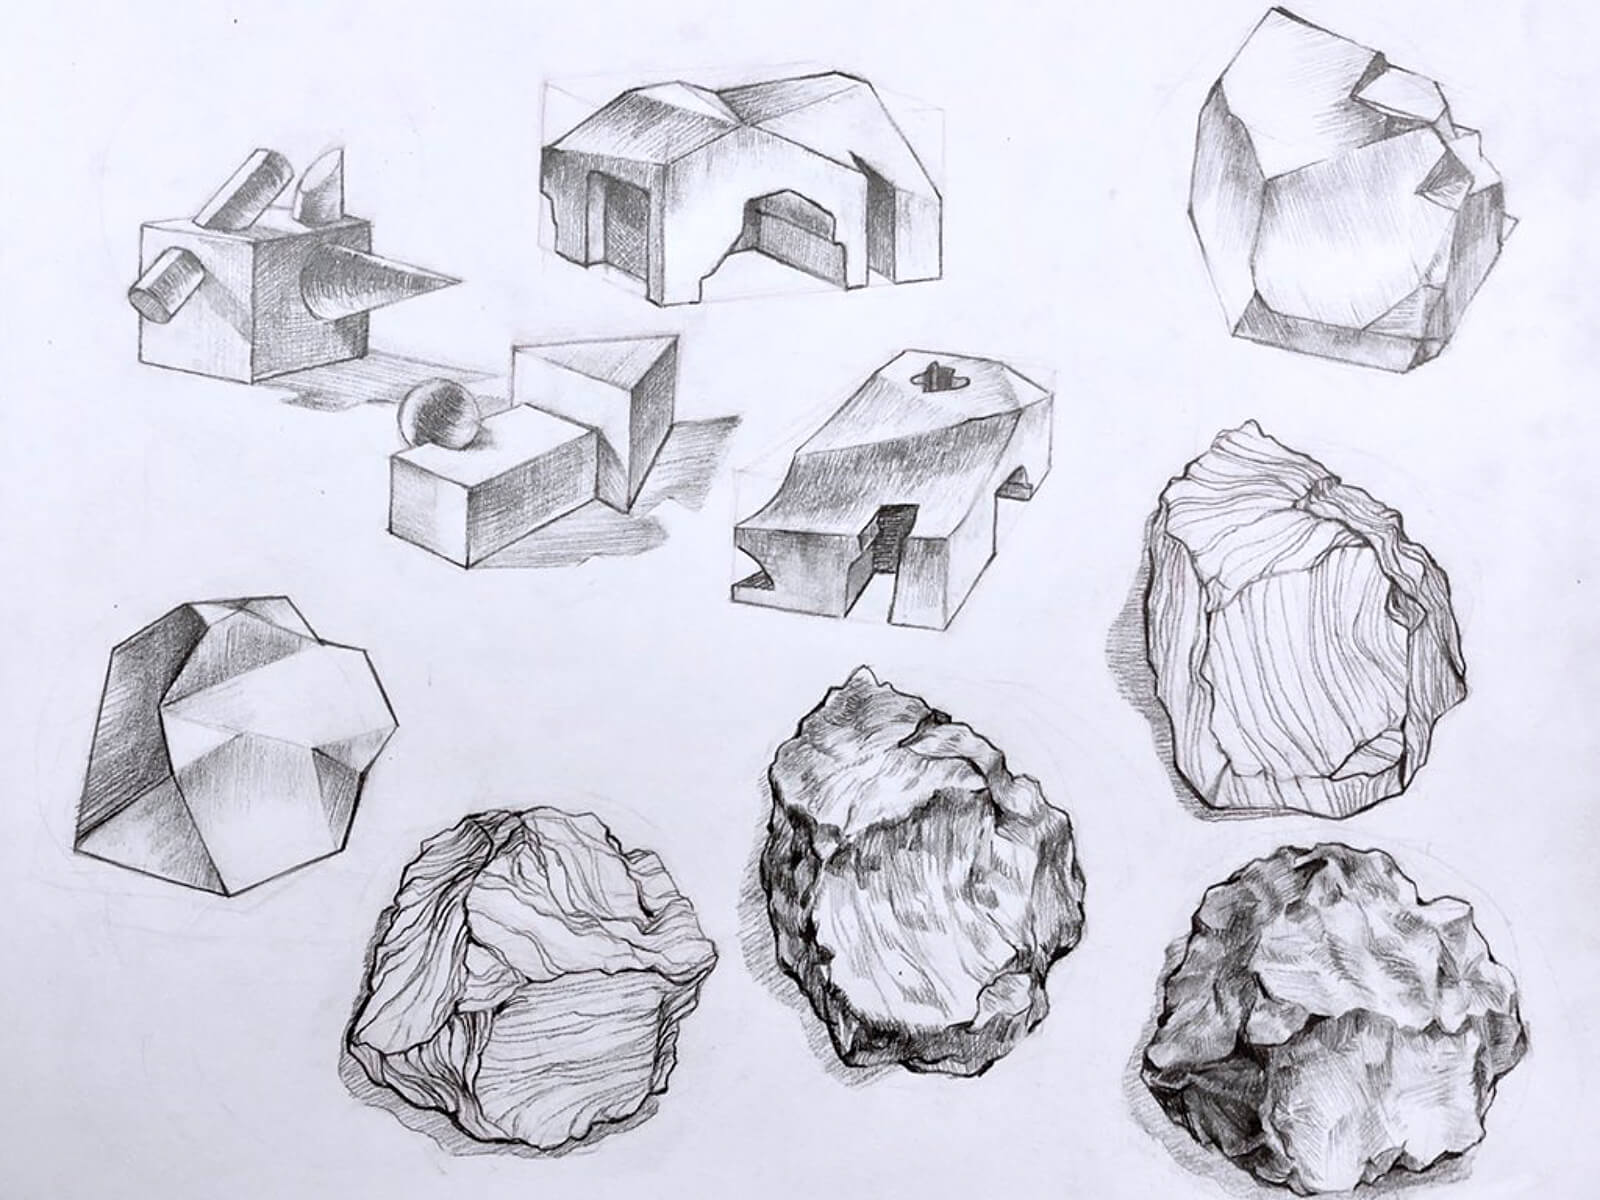 A series of pencil drawings of rocks and geometric shapes